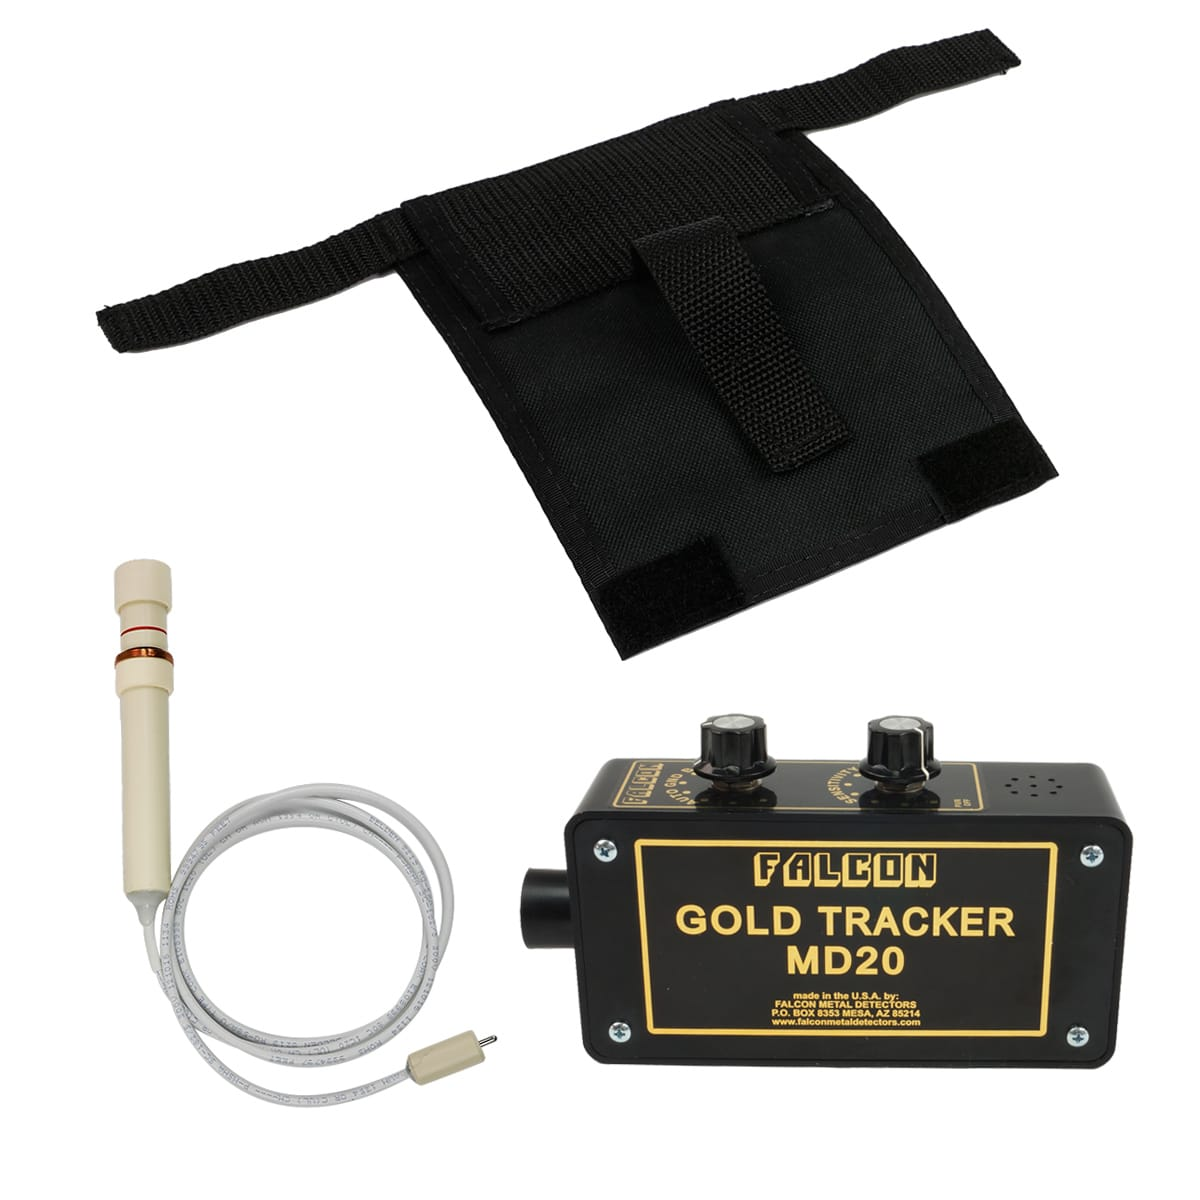 Falcon Gold Tracker MD20 Metal Detector with Belt Holster